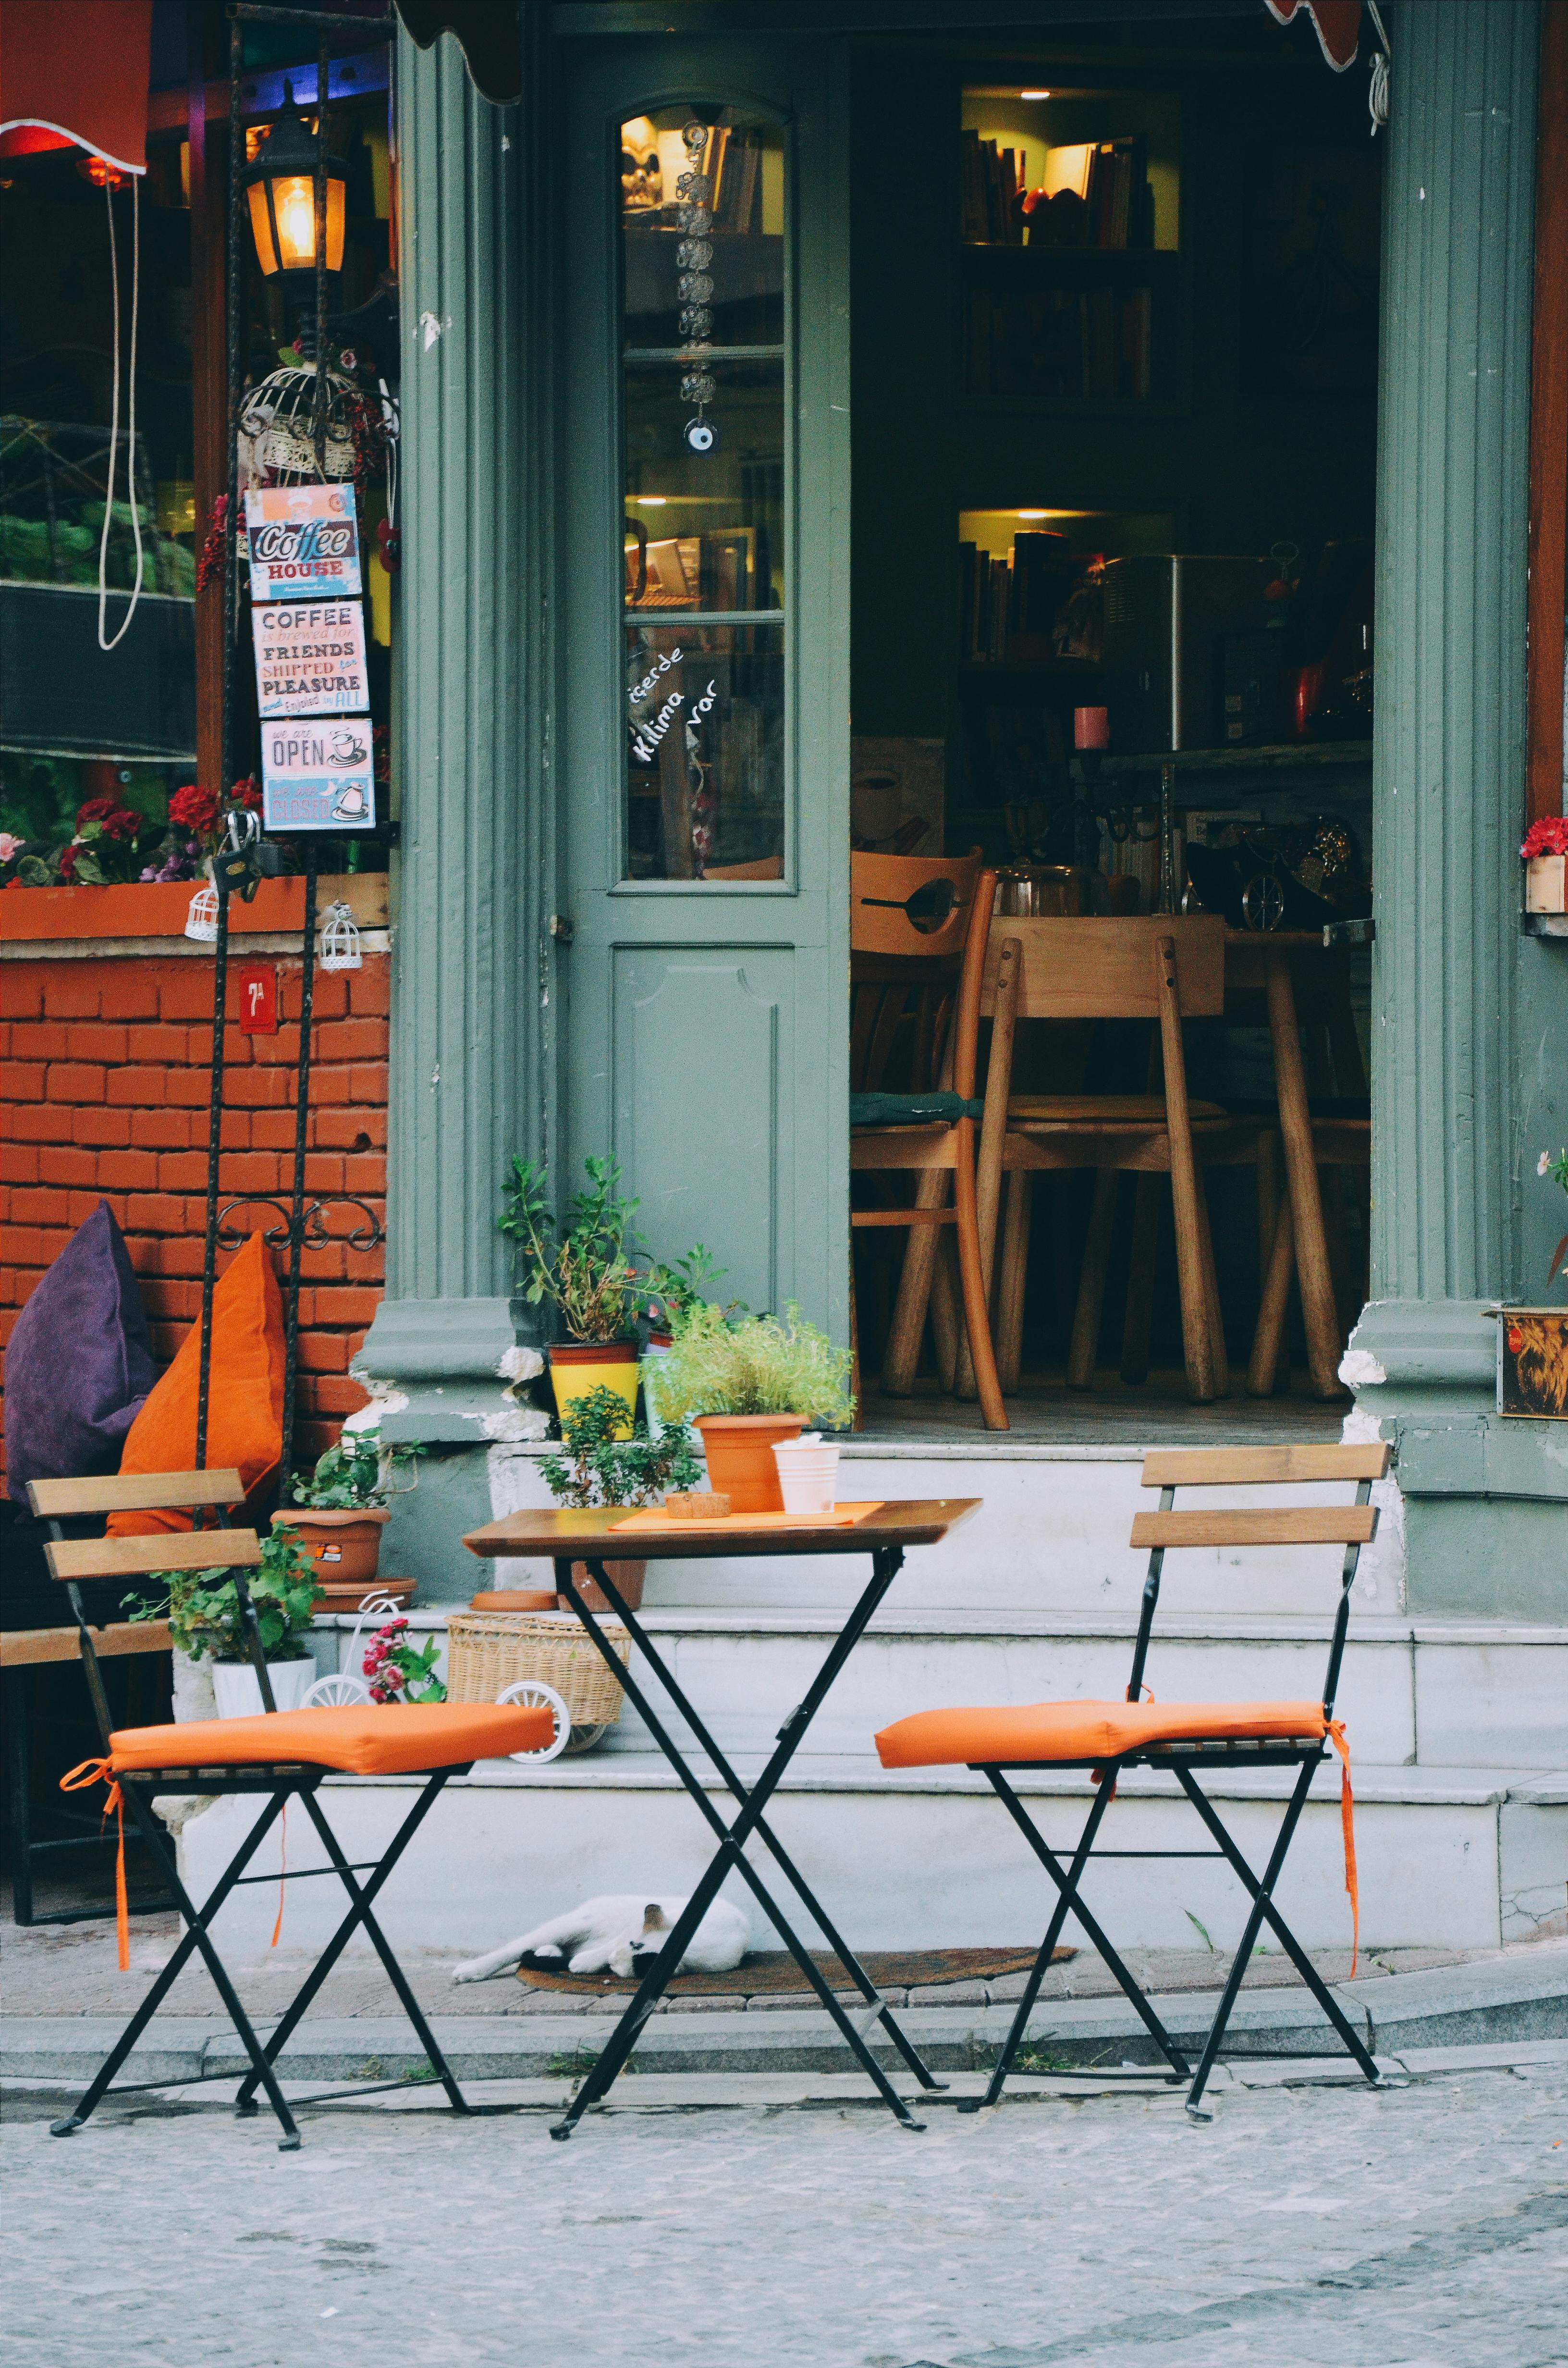 Brown and Orange 3-piece Patio Set Outside A Coffee Shop · Free Stock Photo